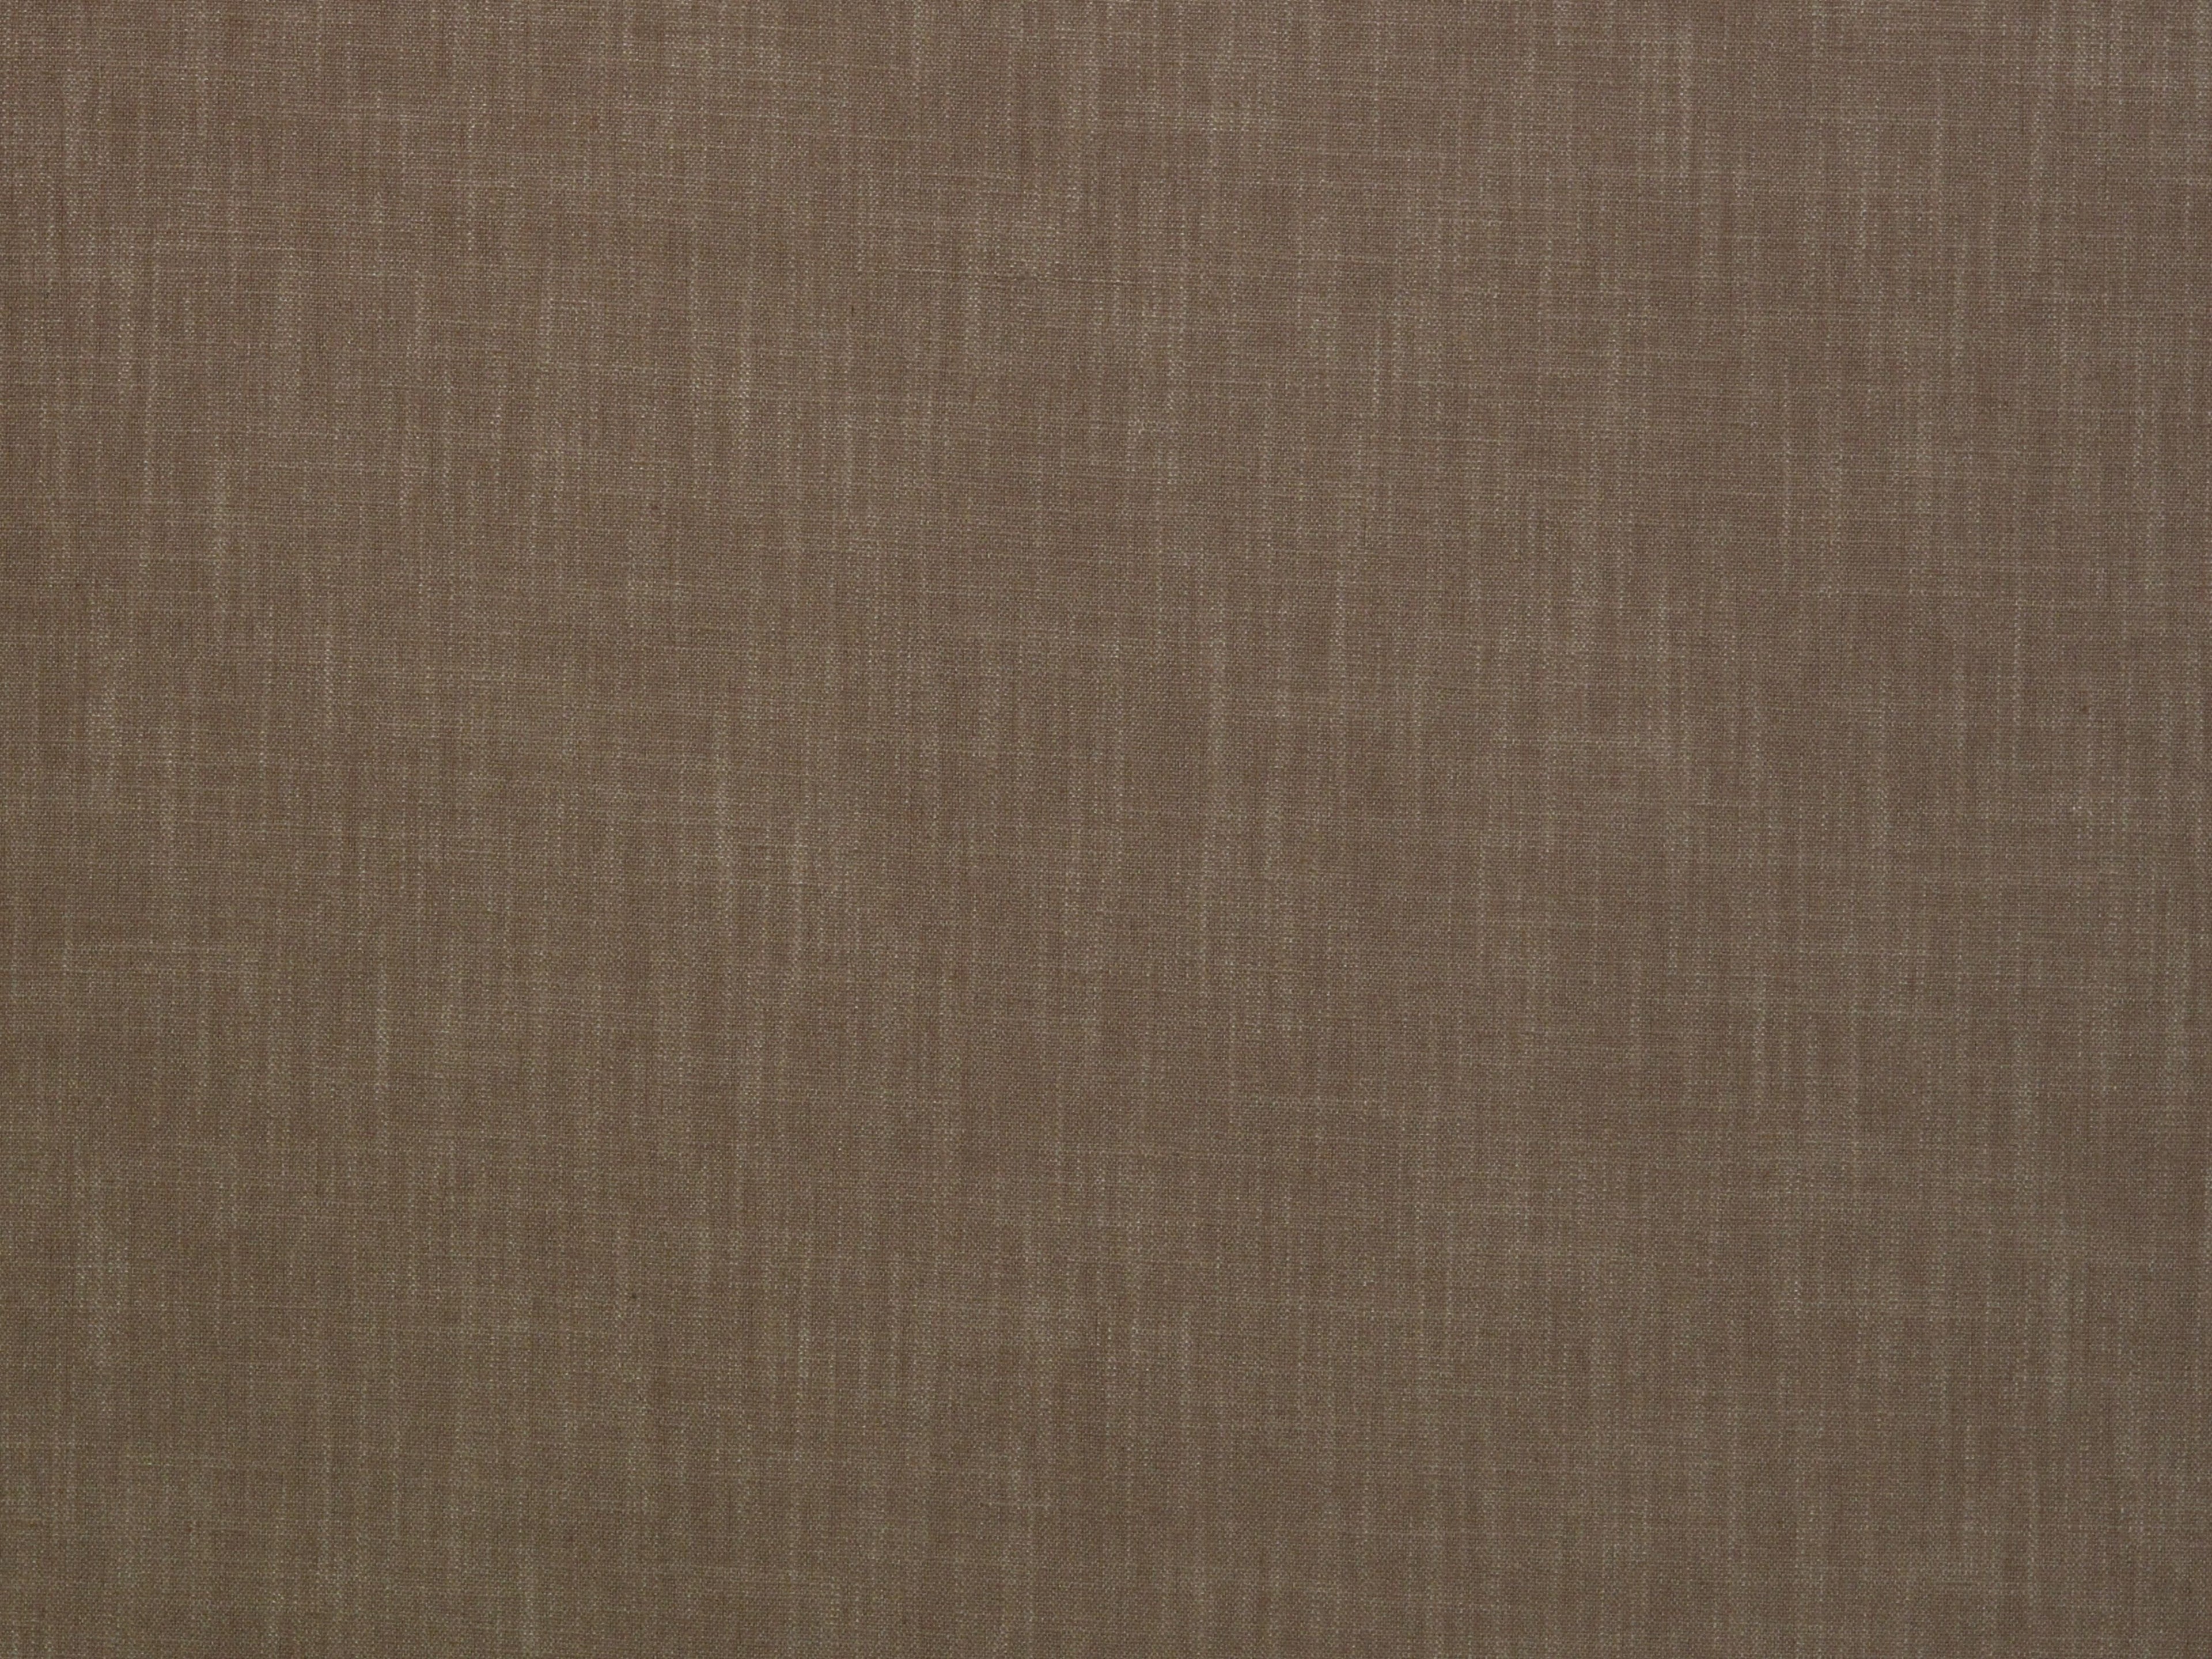 Flax fabric in pecan color - pattern number H6 0008FLAX - by Scalamandre in the Old World Weavers collection